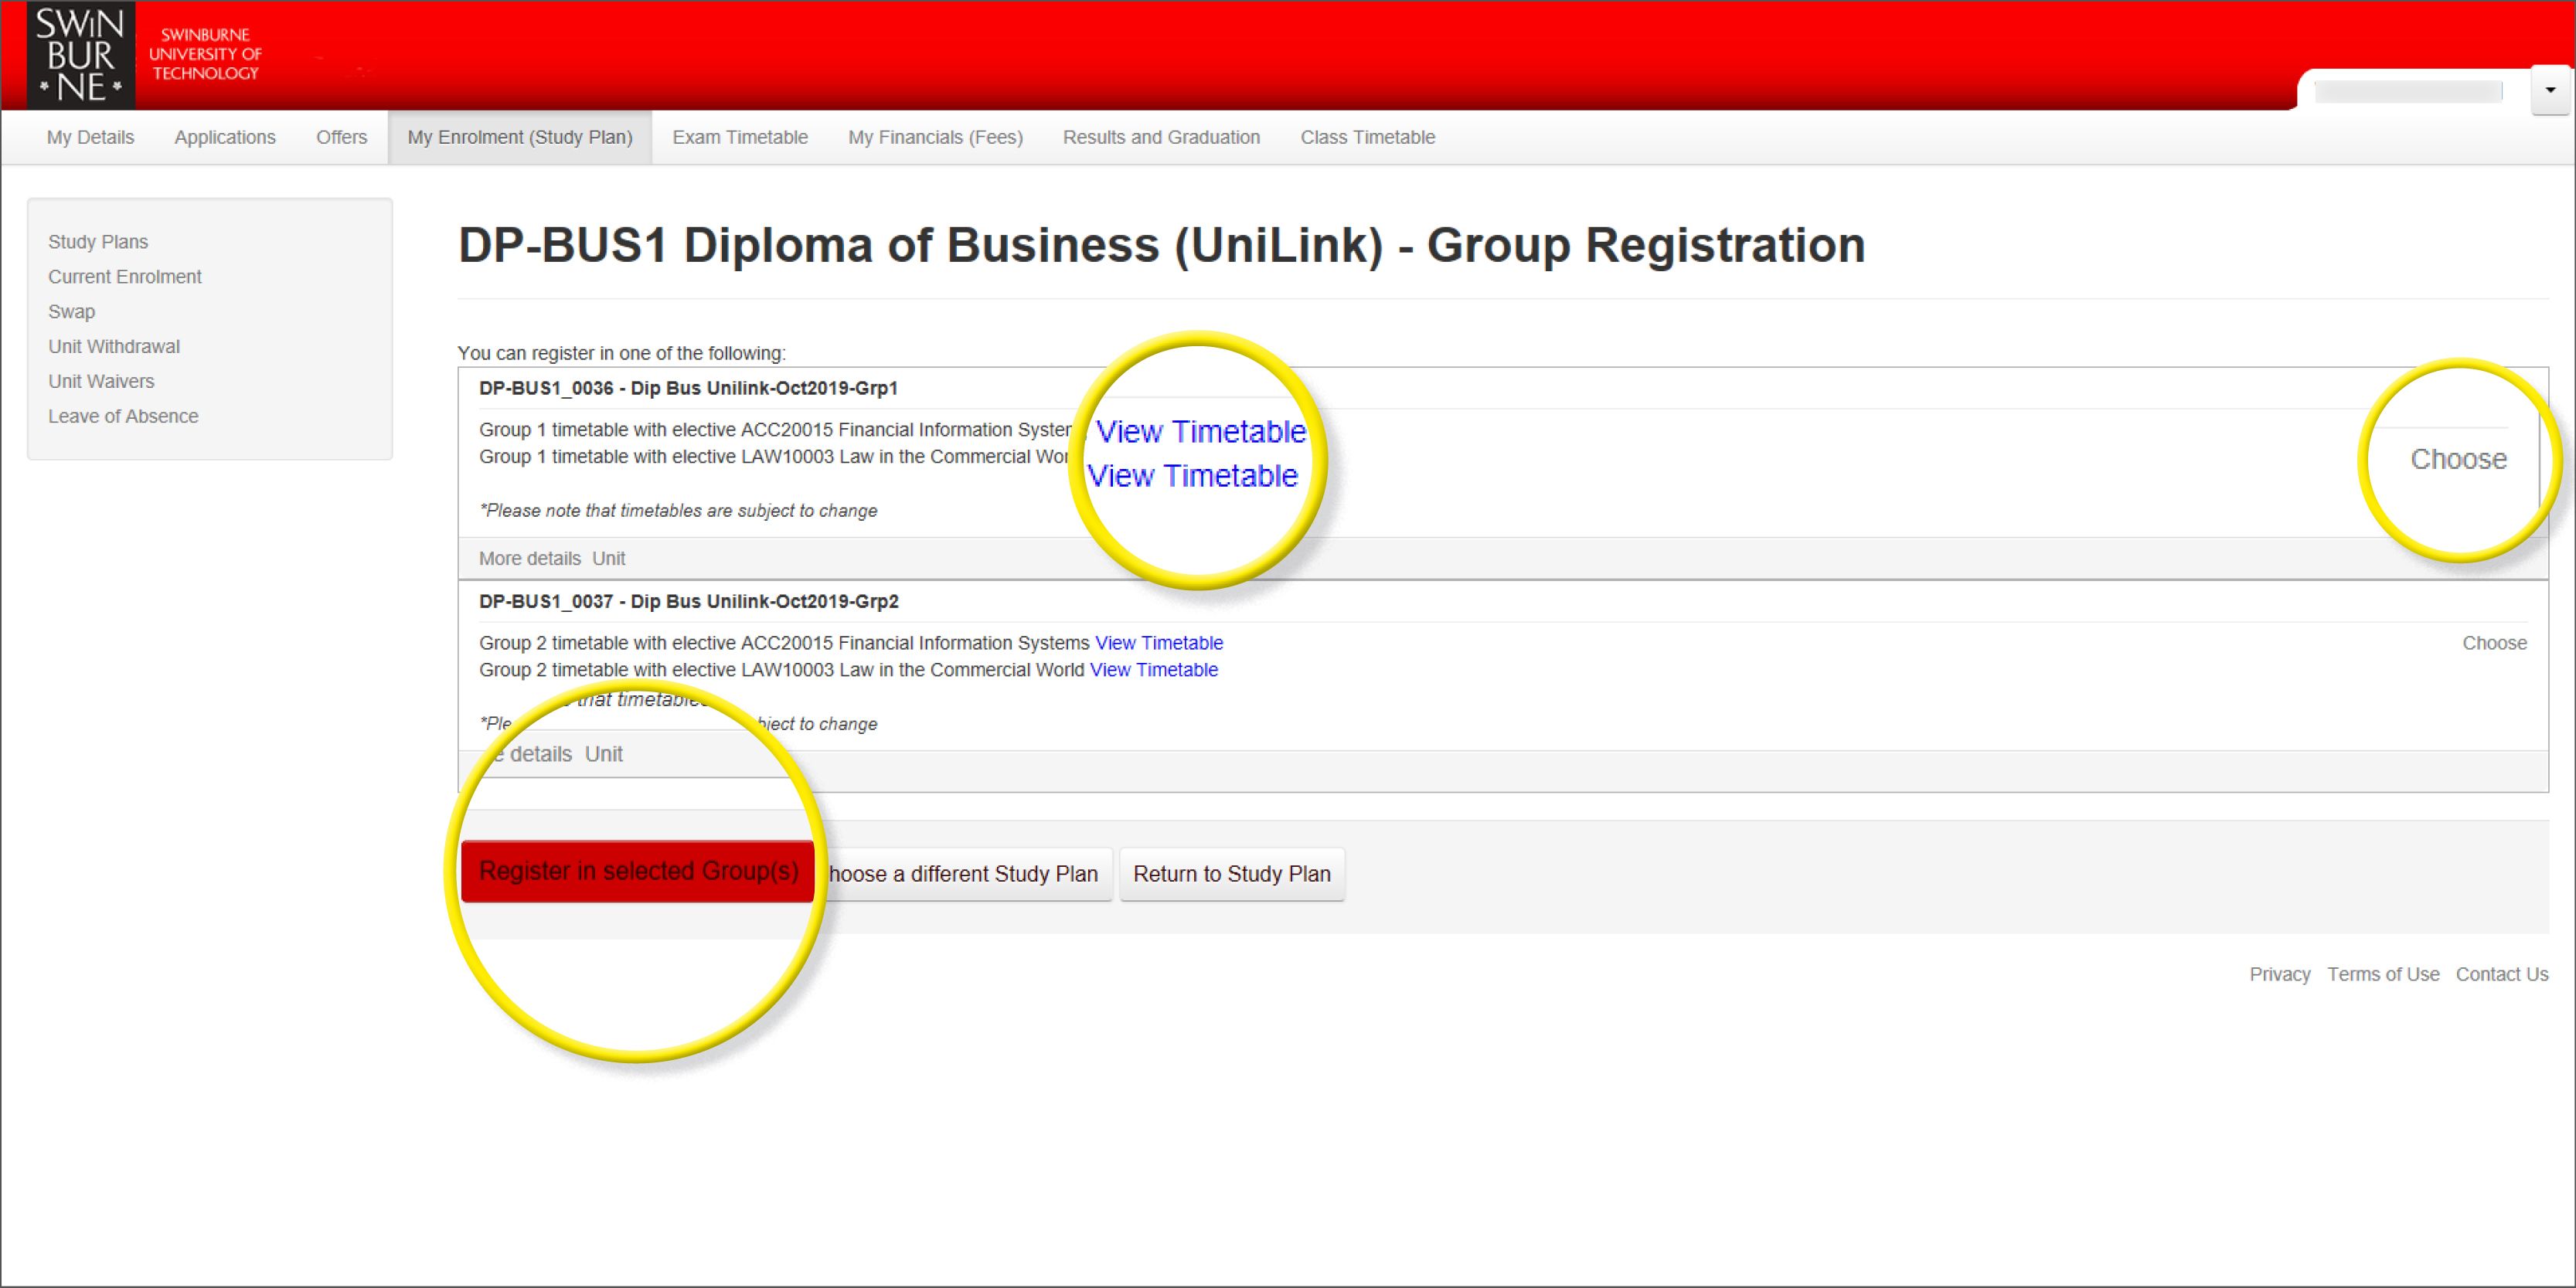 Screenshot of the ‘My Enrolment (study Plan)’ webpage that indicates selecting the grey ‘choose’ text link on the right of the timetable groups and then the red ‘Register in selected Group(s)’ to register.